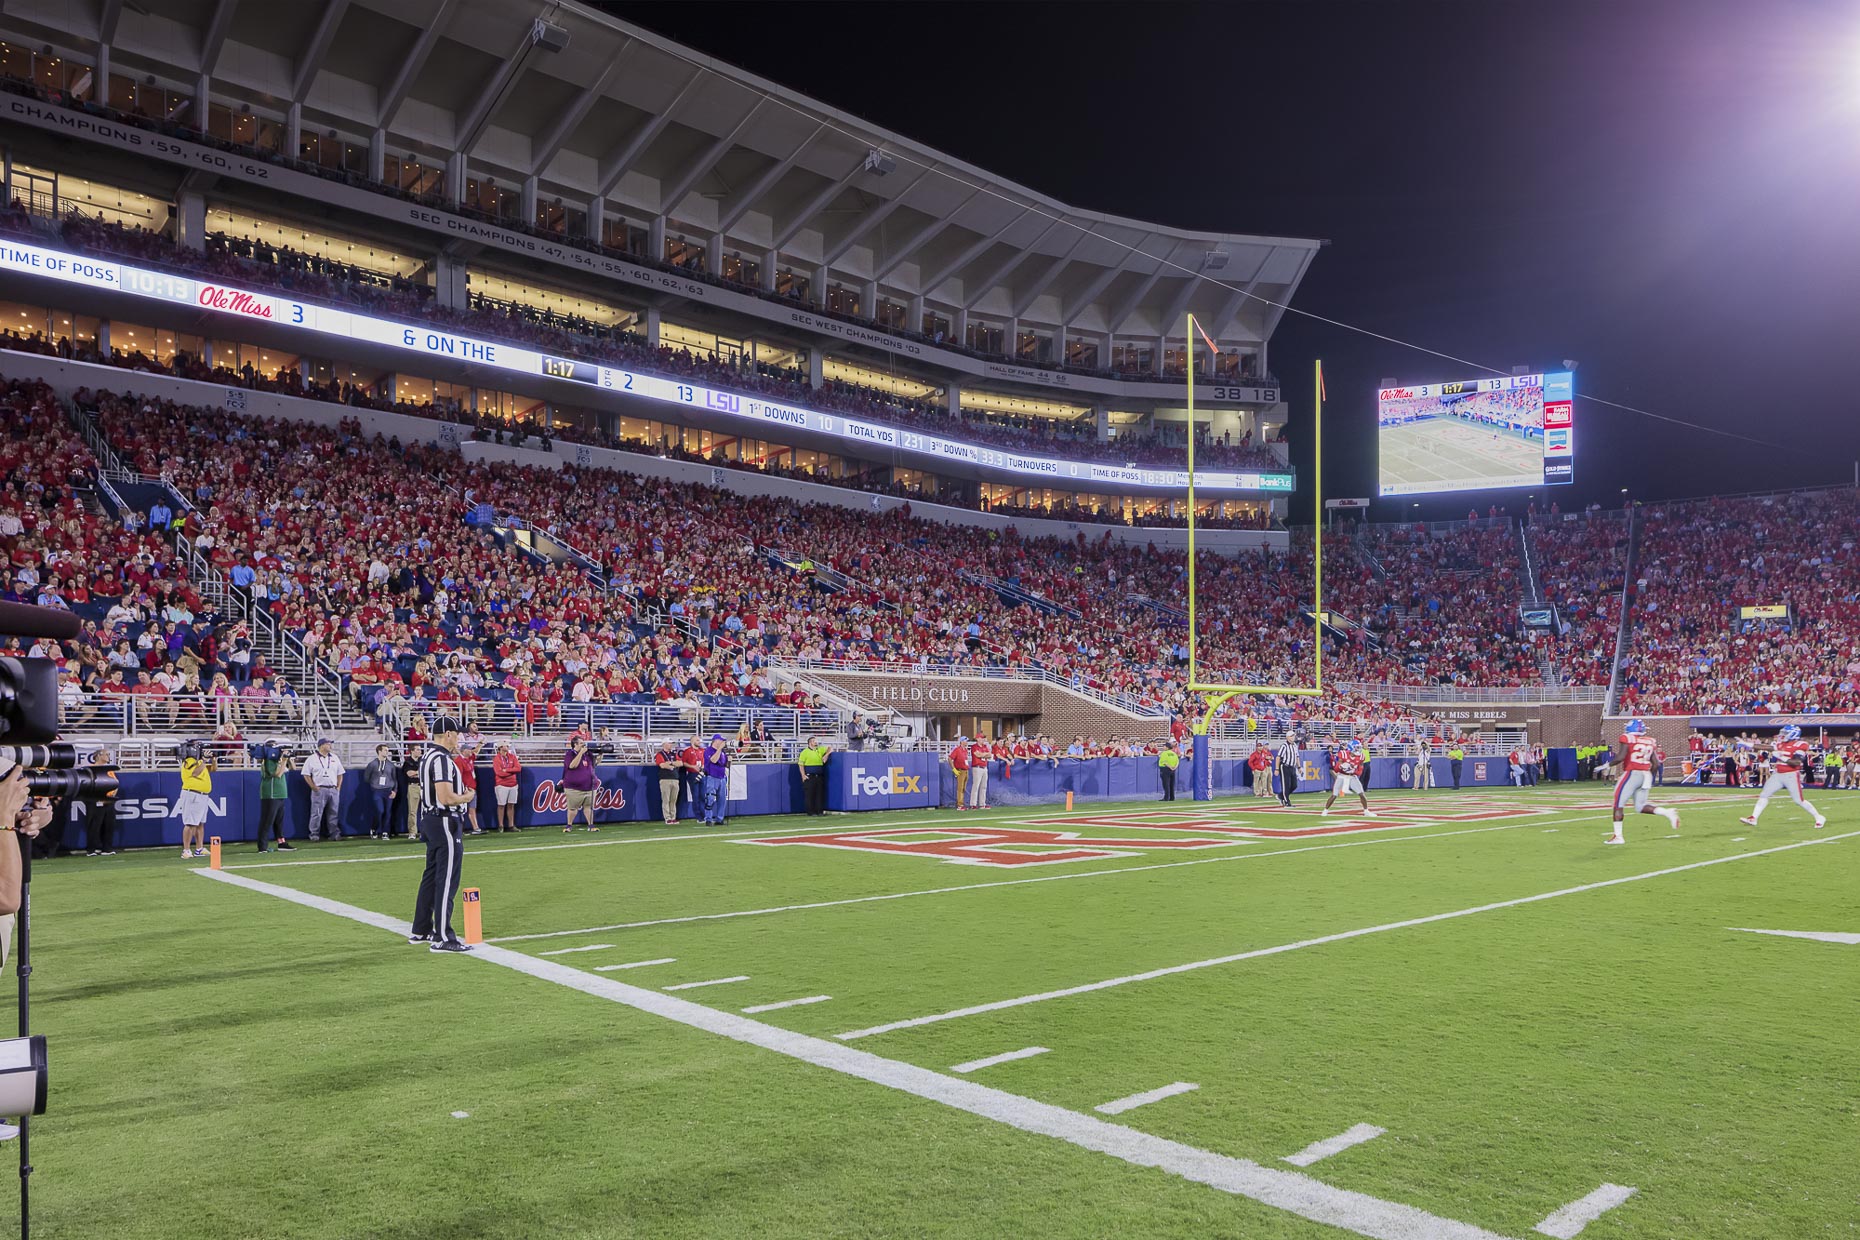 Ole Miss Vaught-Hemingway Stadium Expansion by AECOM photographed by Brad Feinknopf based in Columbus, Ohio